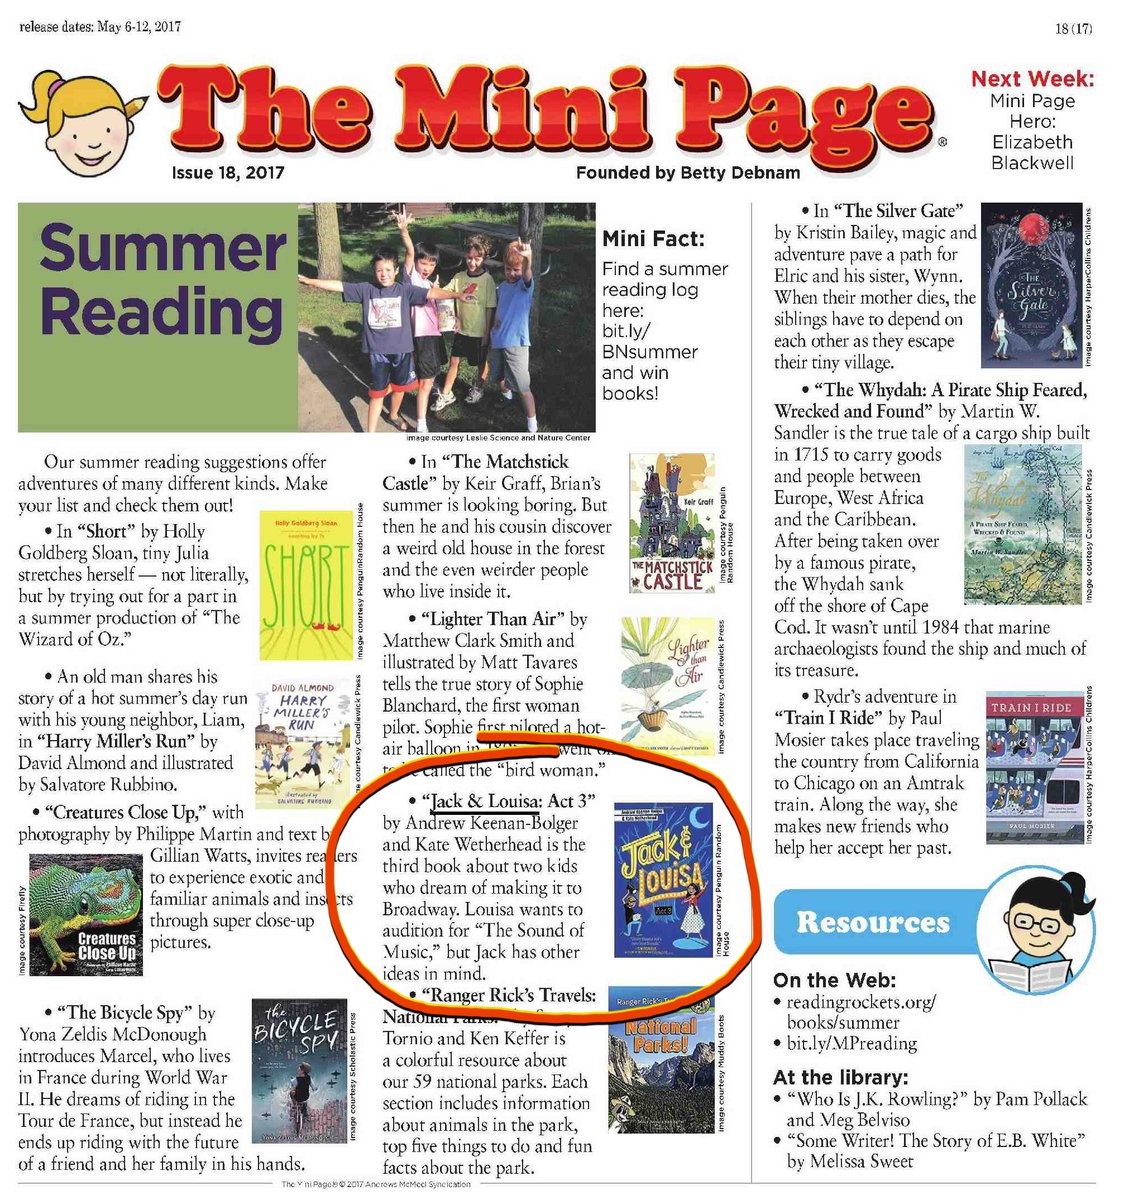 The Mini Page, a nationally syndicated kids book column, included #JackAndLouisa #Act3 in its summer reading round-up! @GetRichJack